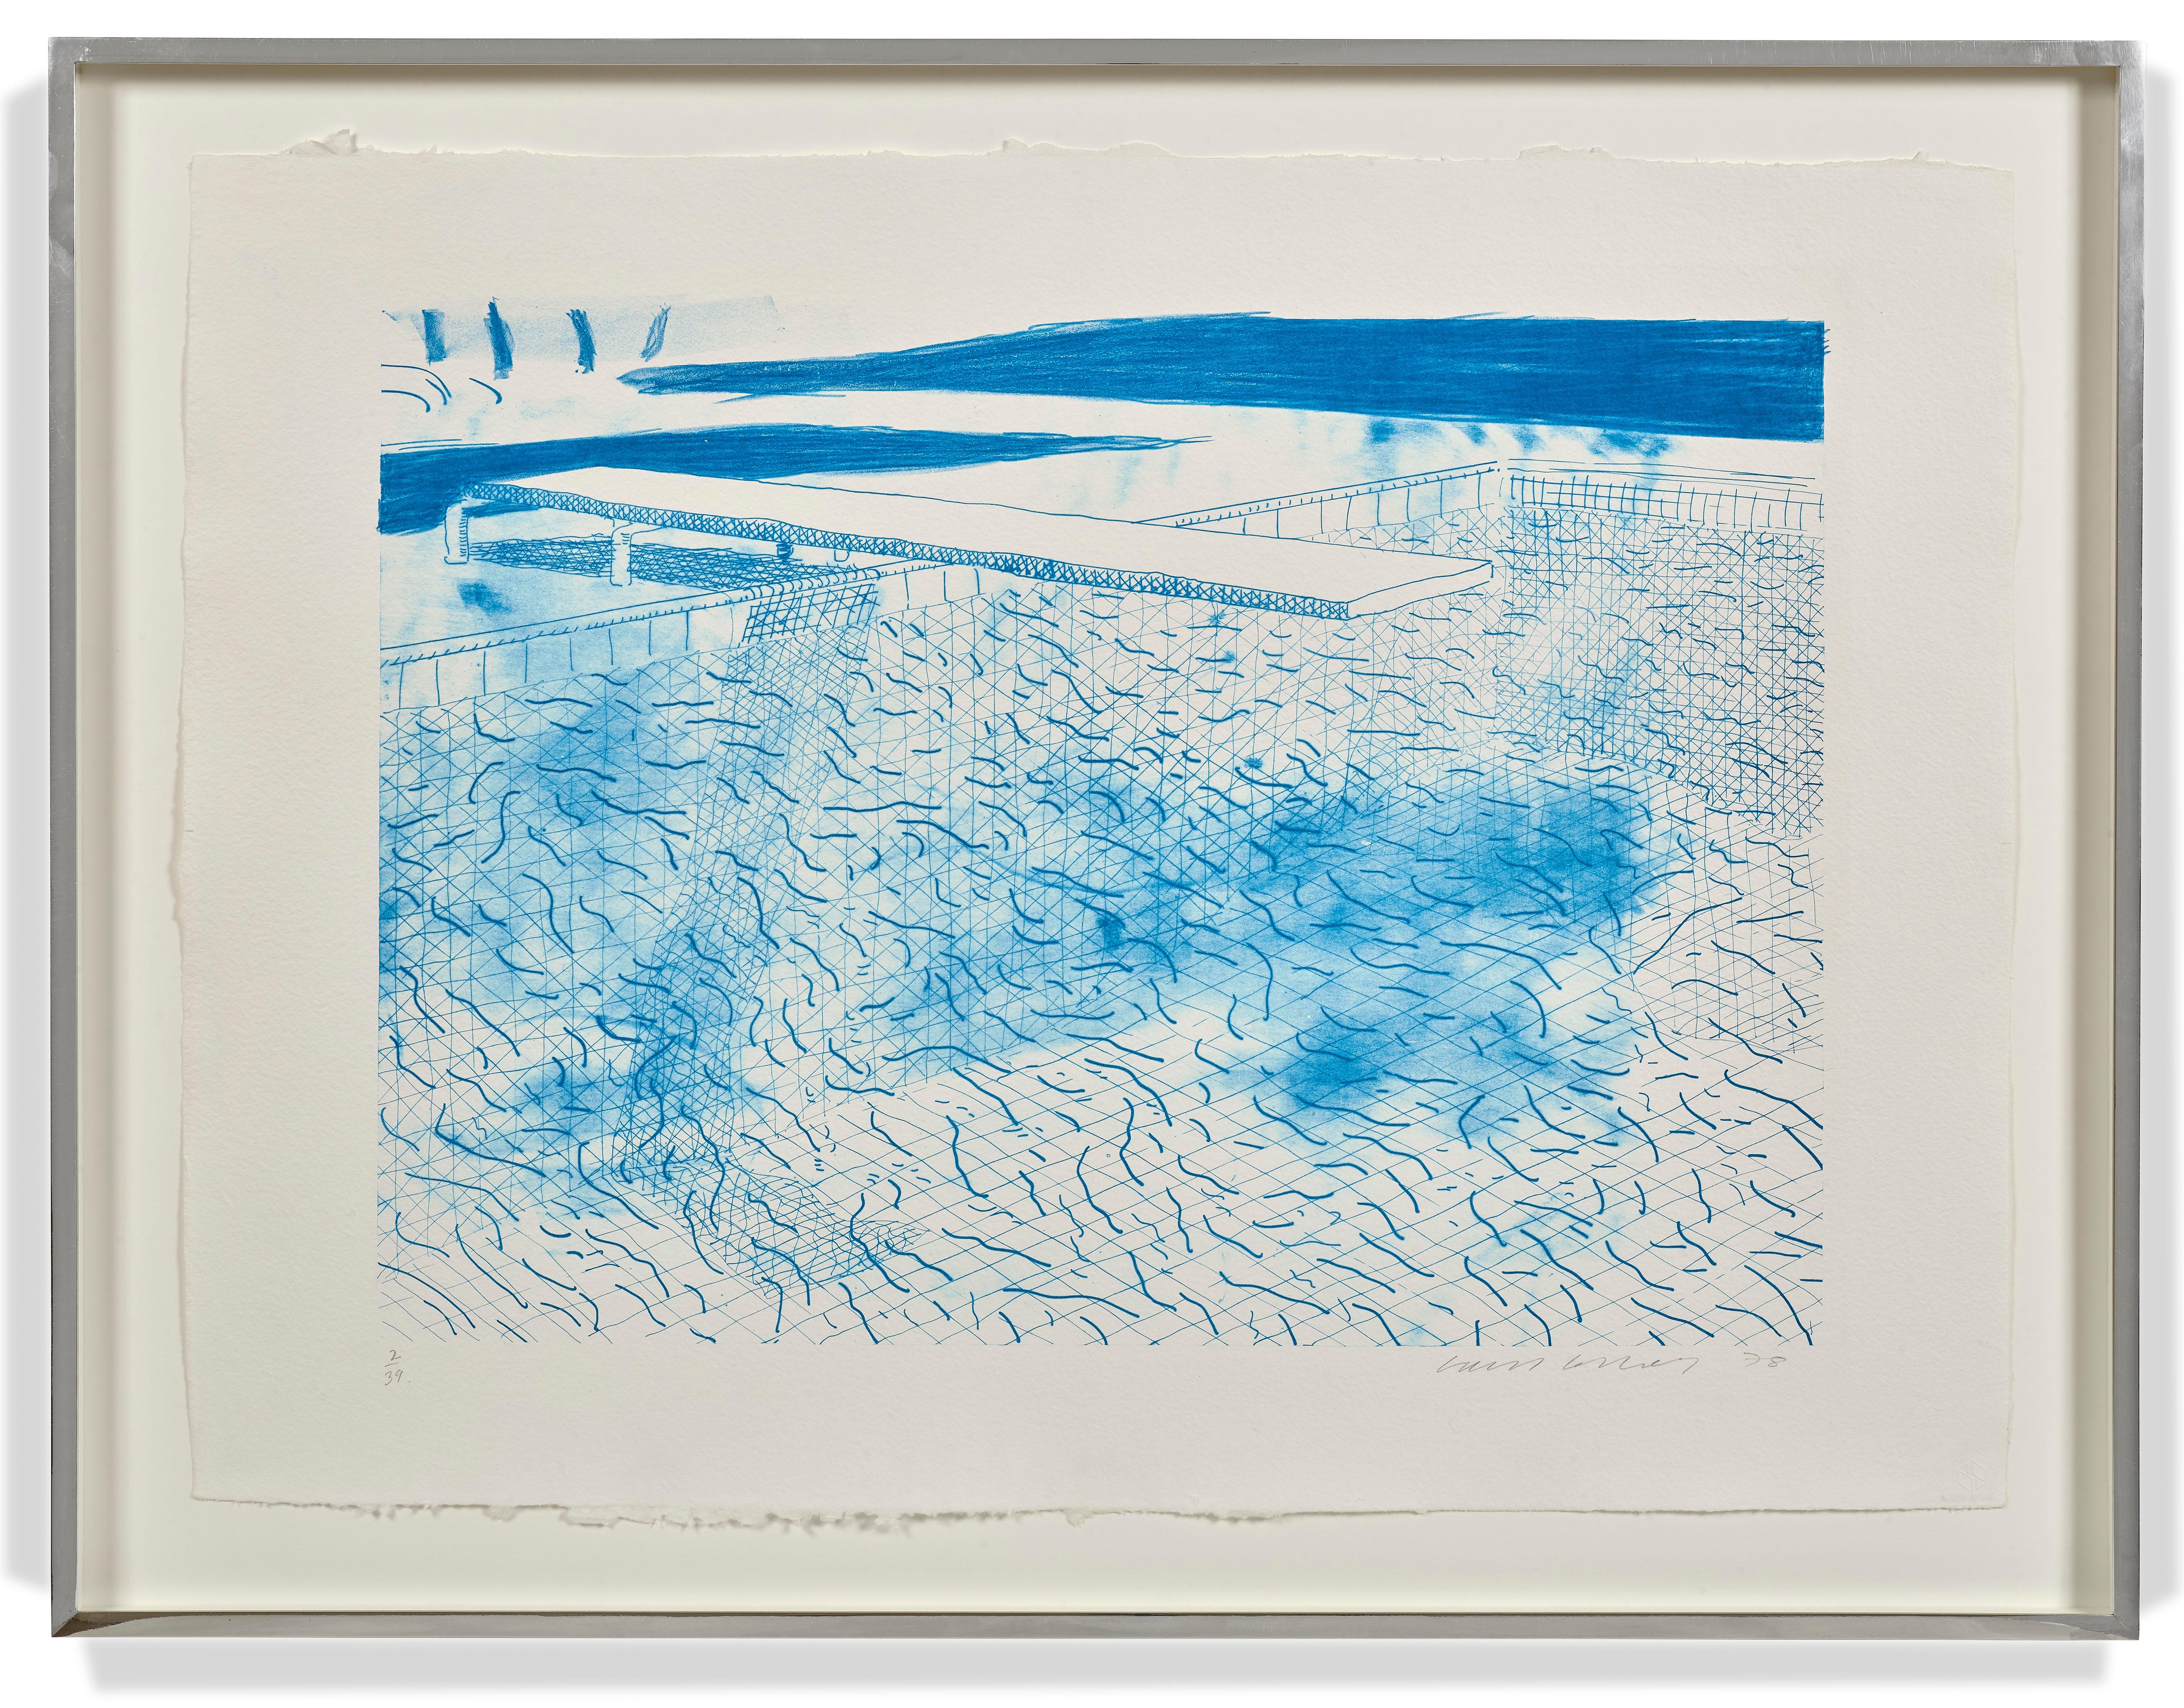 David Hockney Figurative Print - Lithograph of Water Made of Lines, two shades of cyan blue, 1978